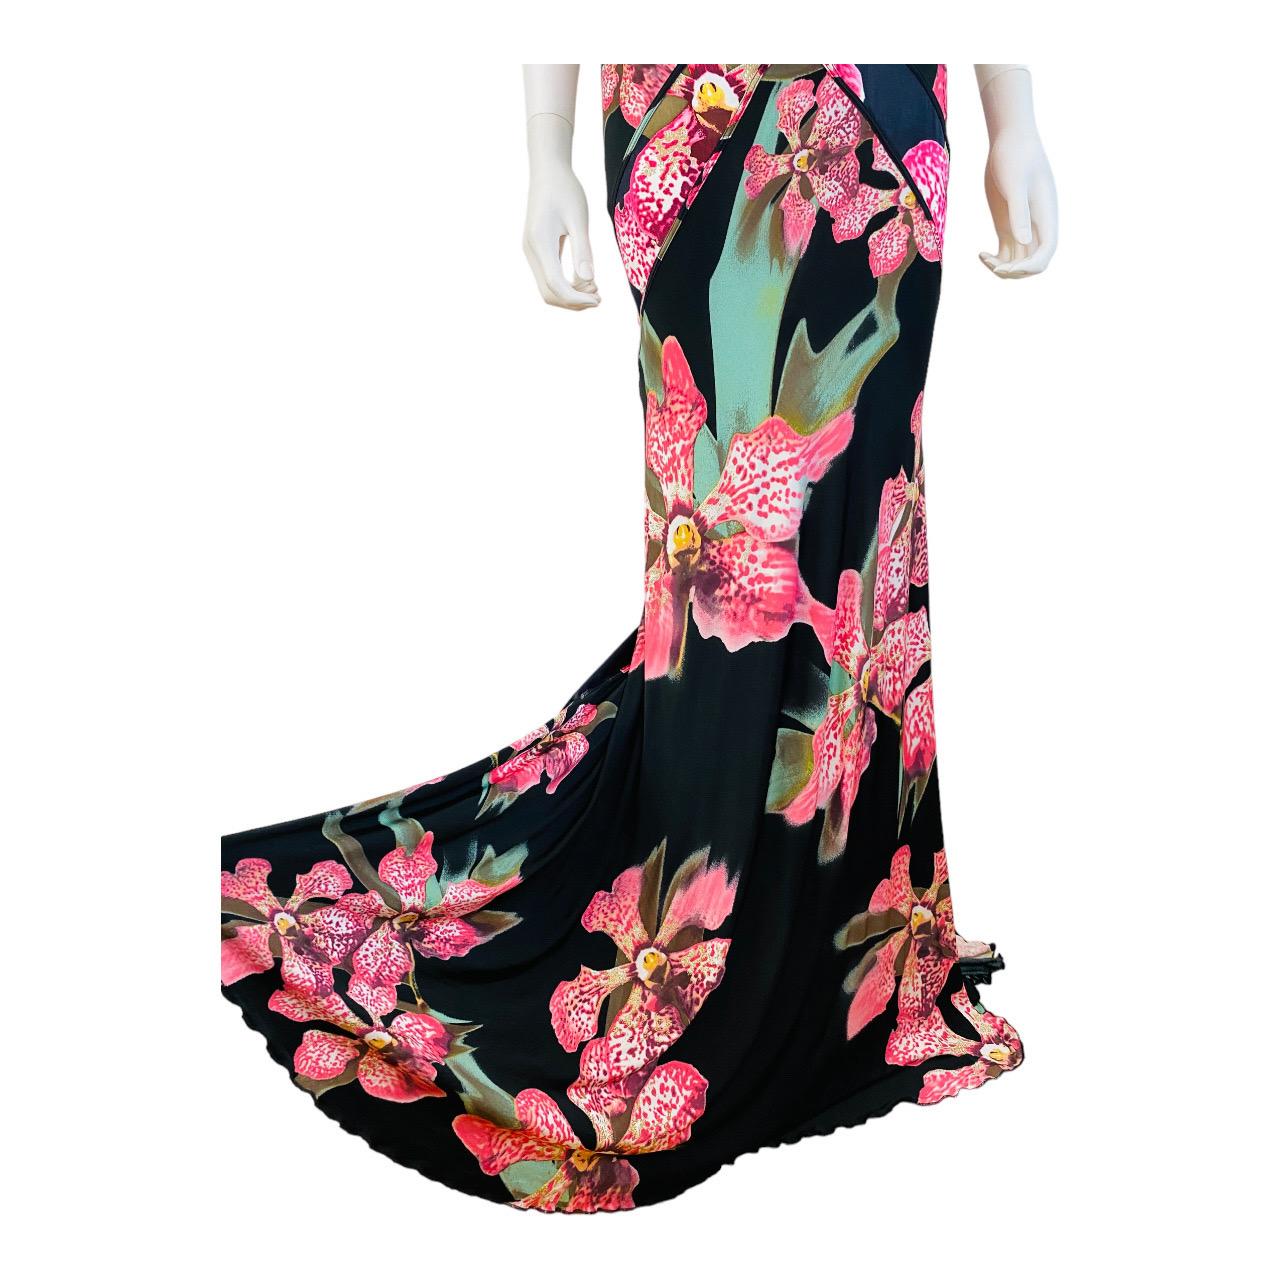 Vintage Roberto Cavalli F/W 2004 Floral Orchid Print Pink + Black Dress Gown For Sale 4